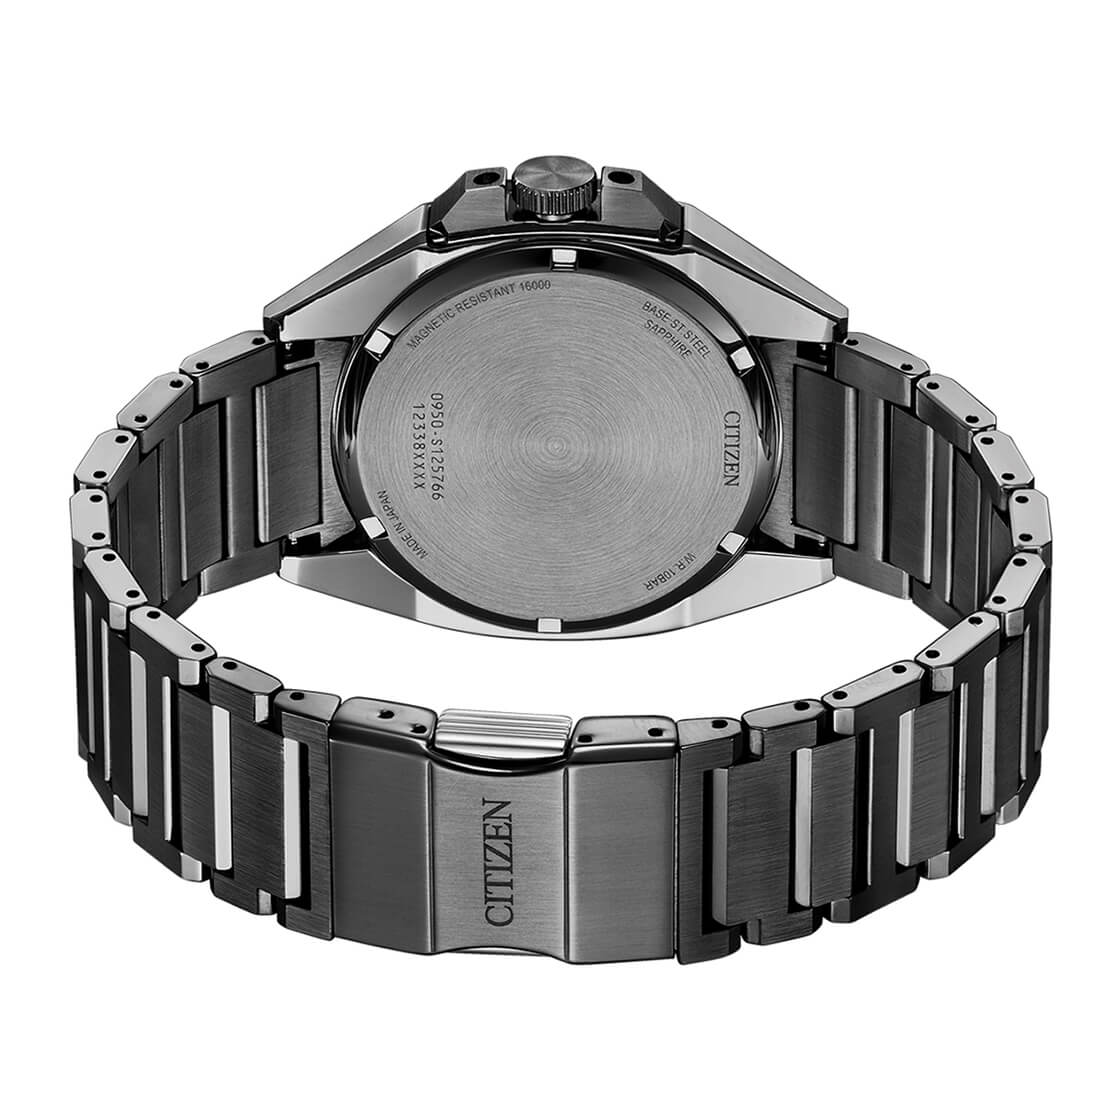 Men's Series 8 Automatic Watch (NA1015-81Z)